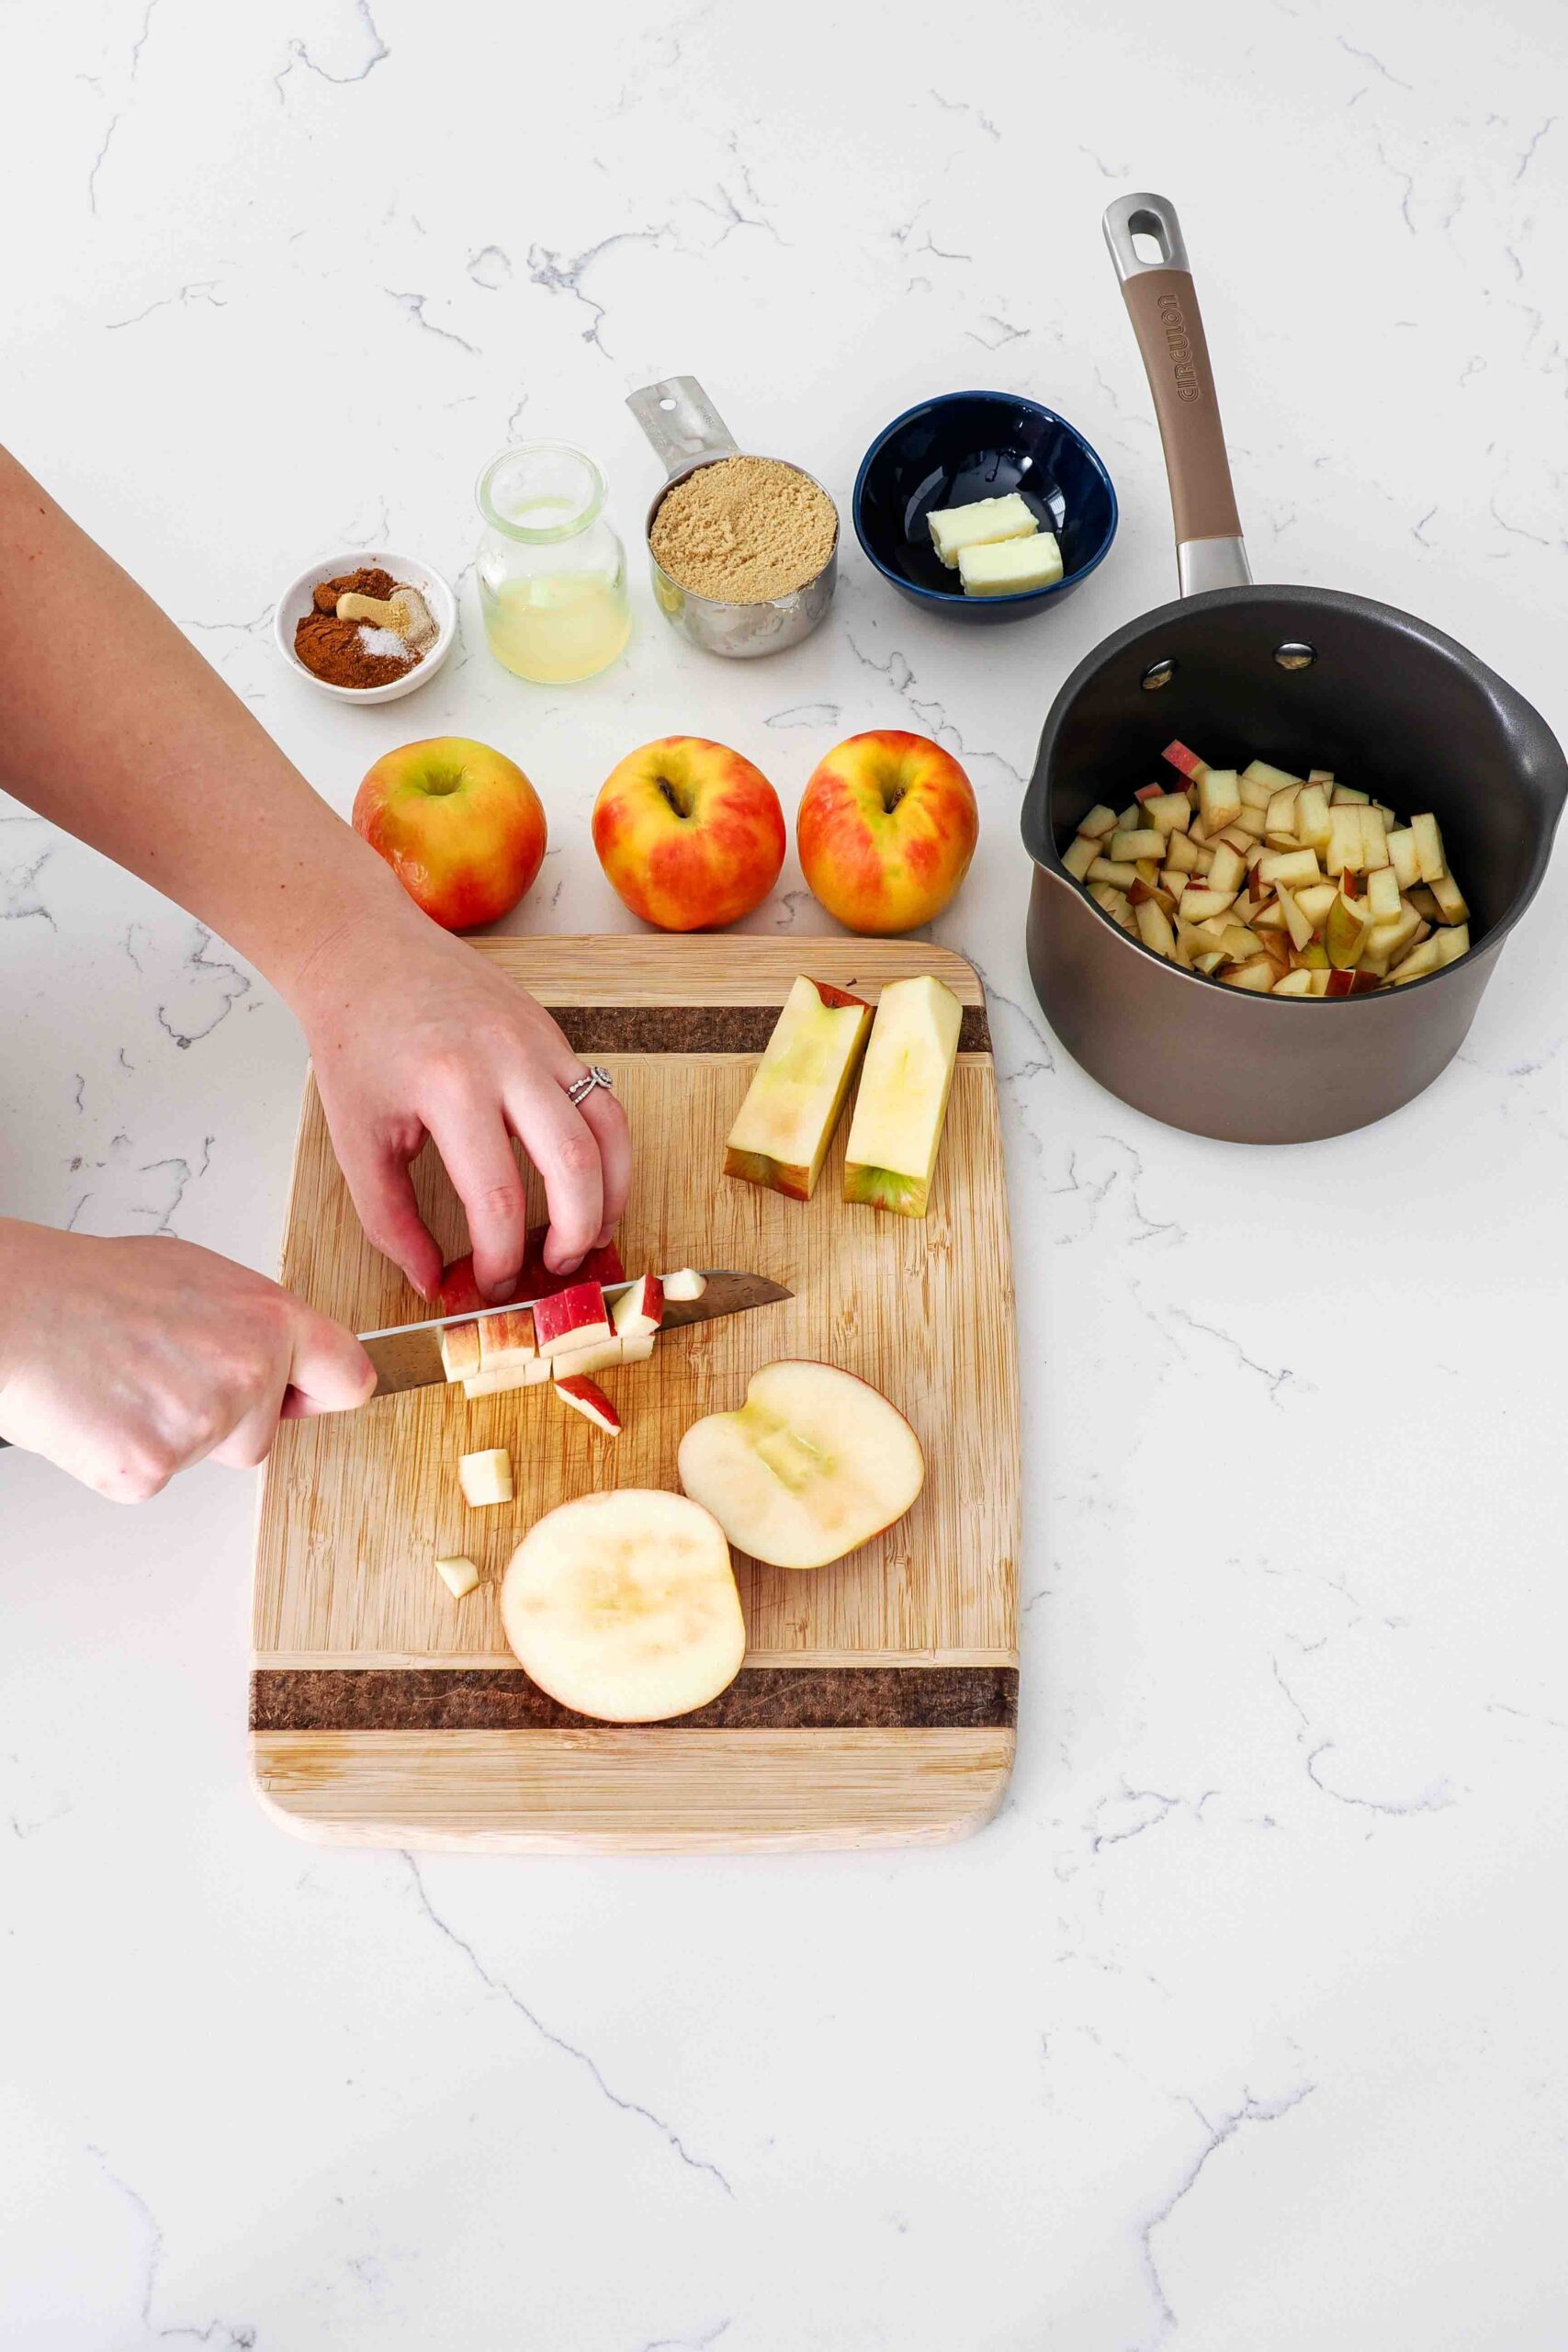 Two hands slice apples on a cutting board.